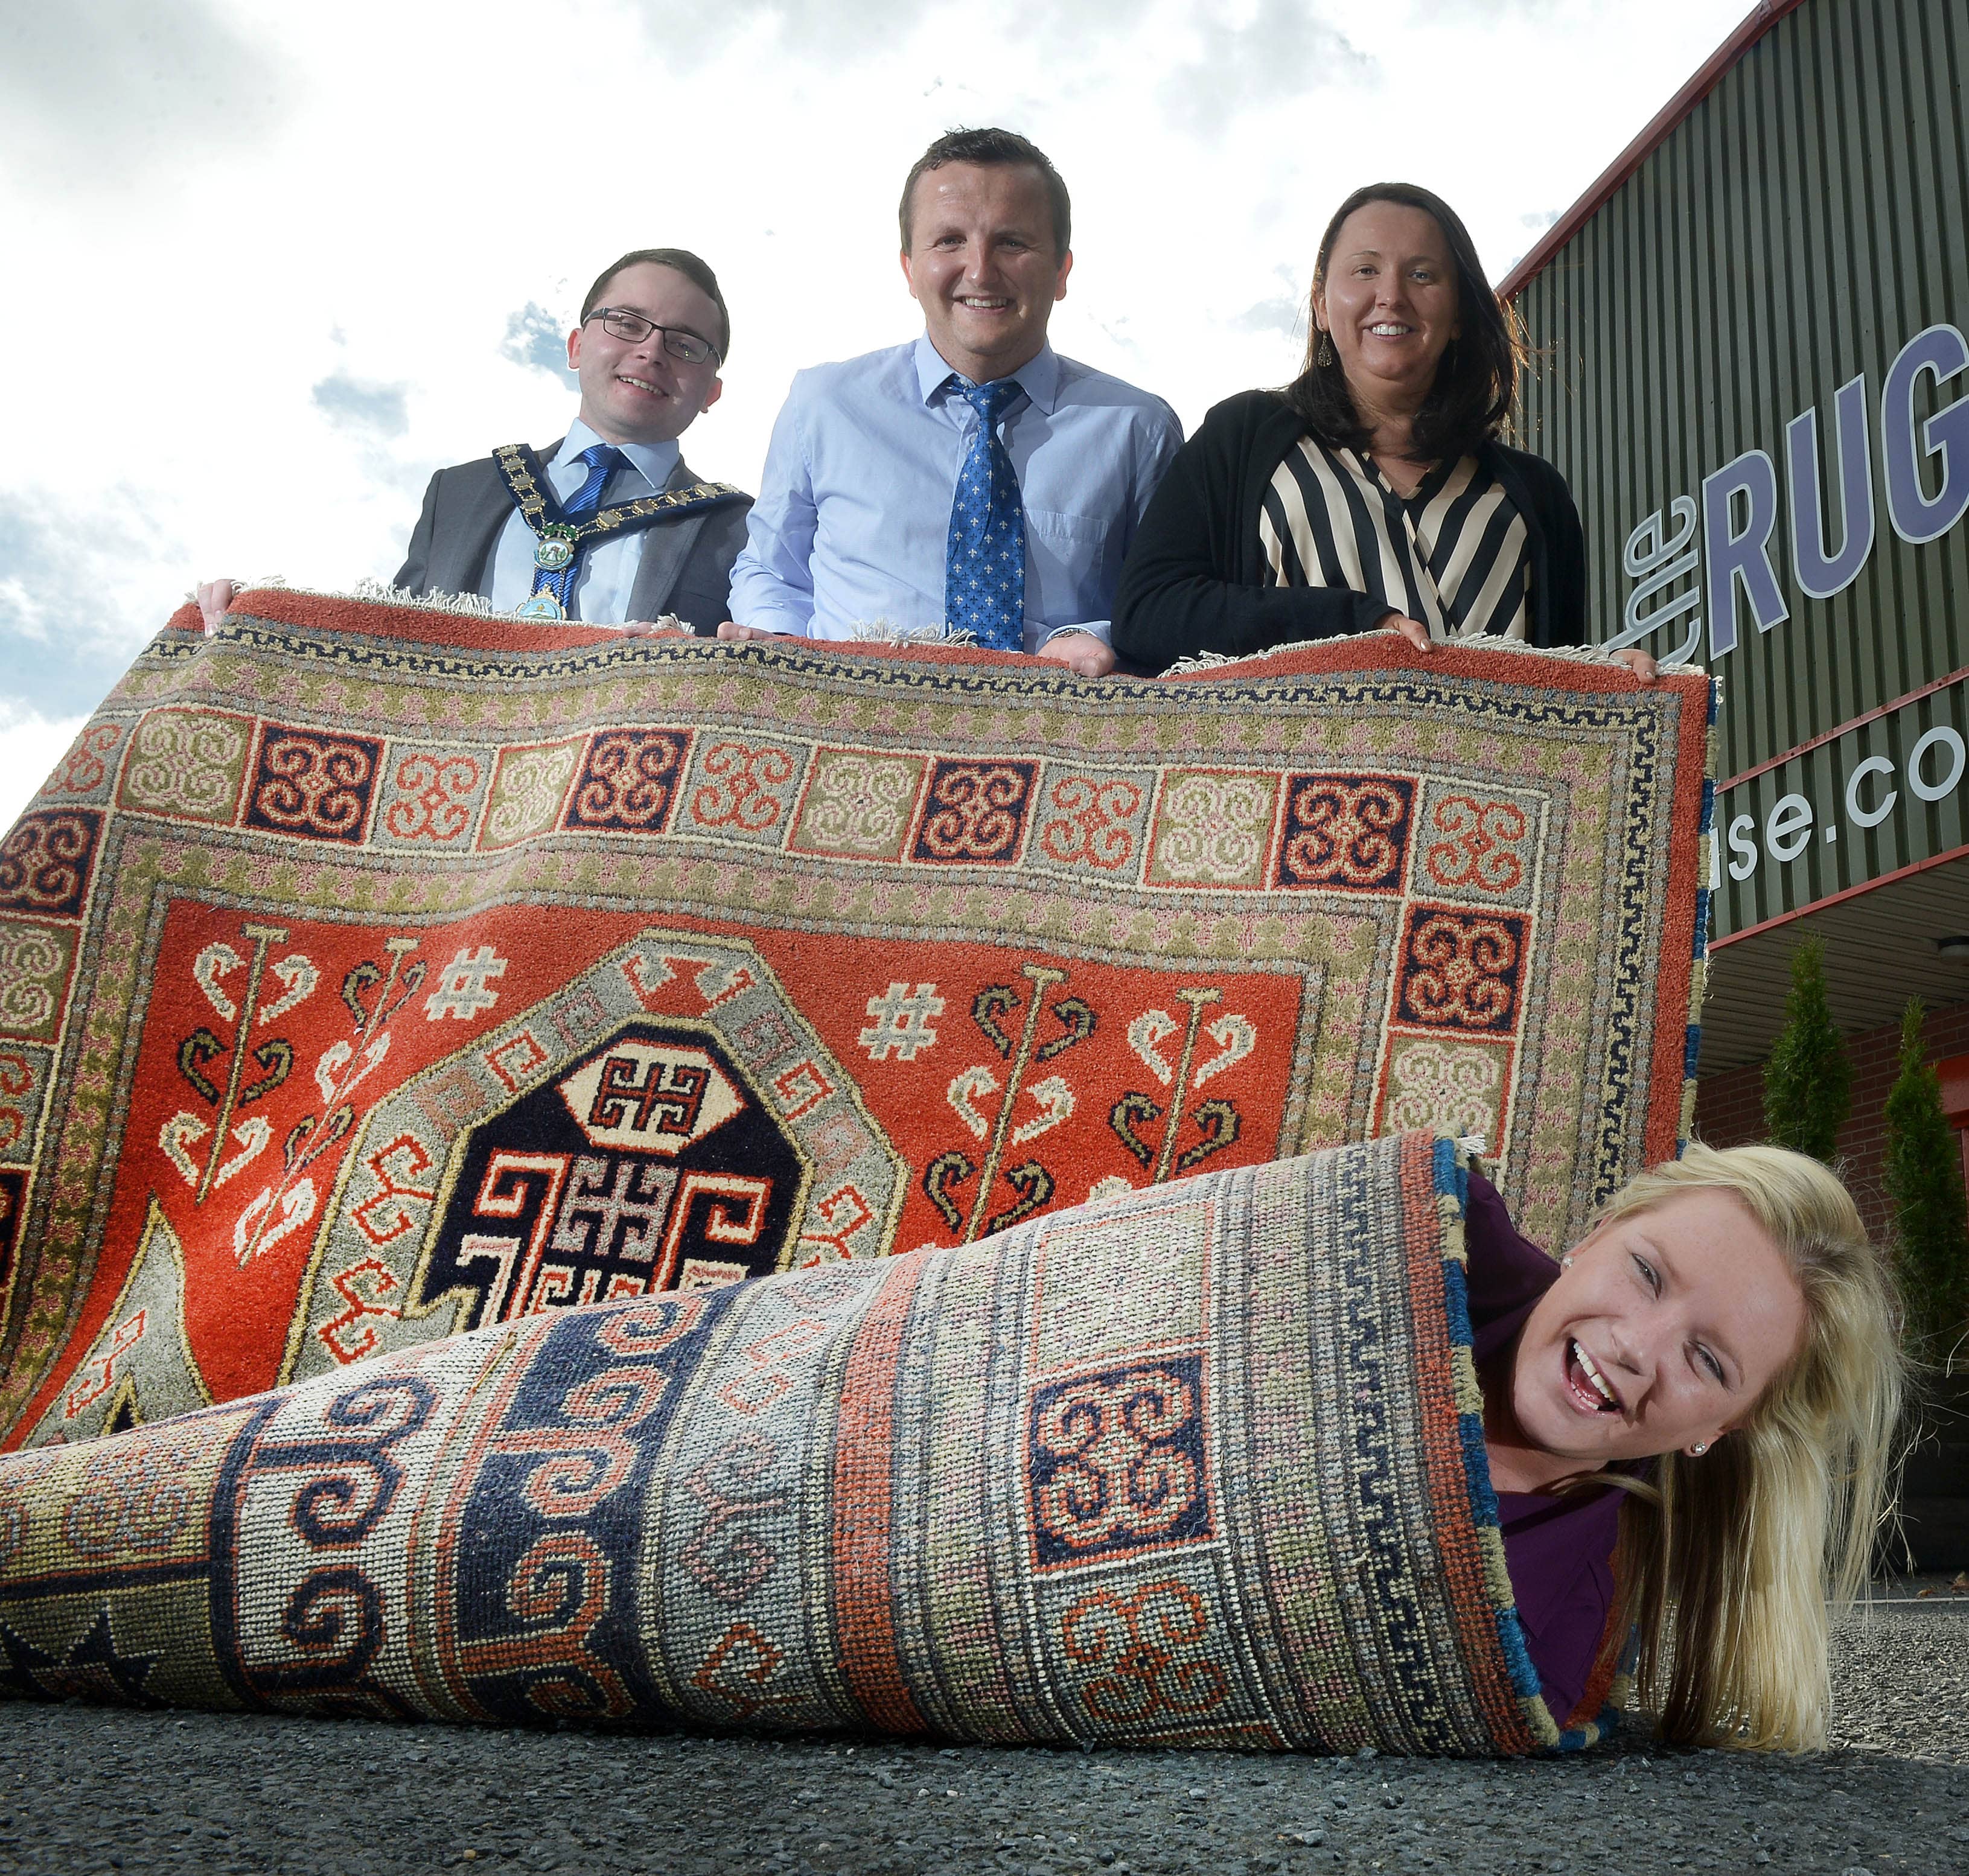 Left to right - Newry & Mourne Mayor Daire Hughes Owner's Paul Vallely & Clare Vallely Rug = Roisin Molloy (The Rug House)